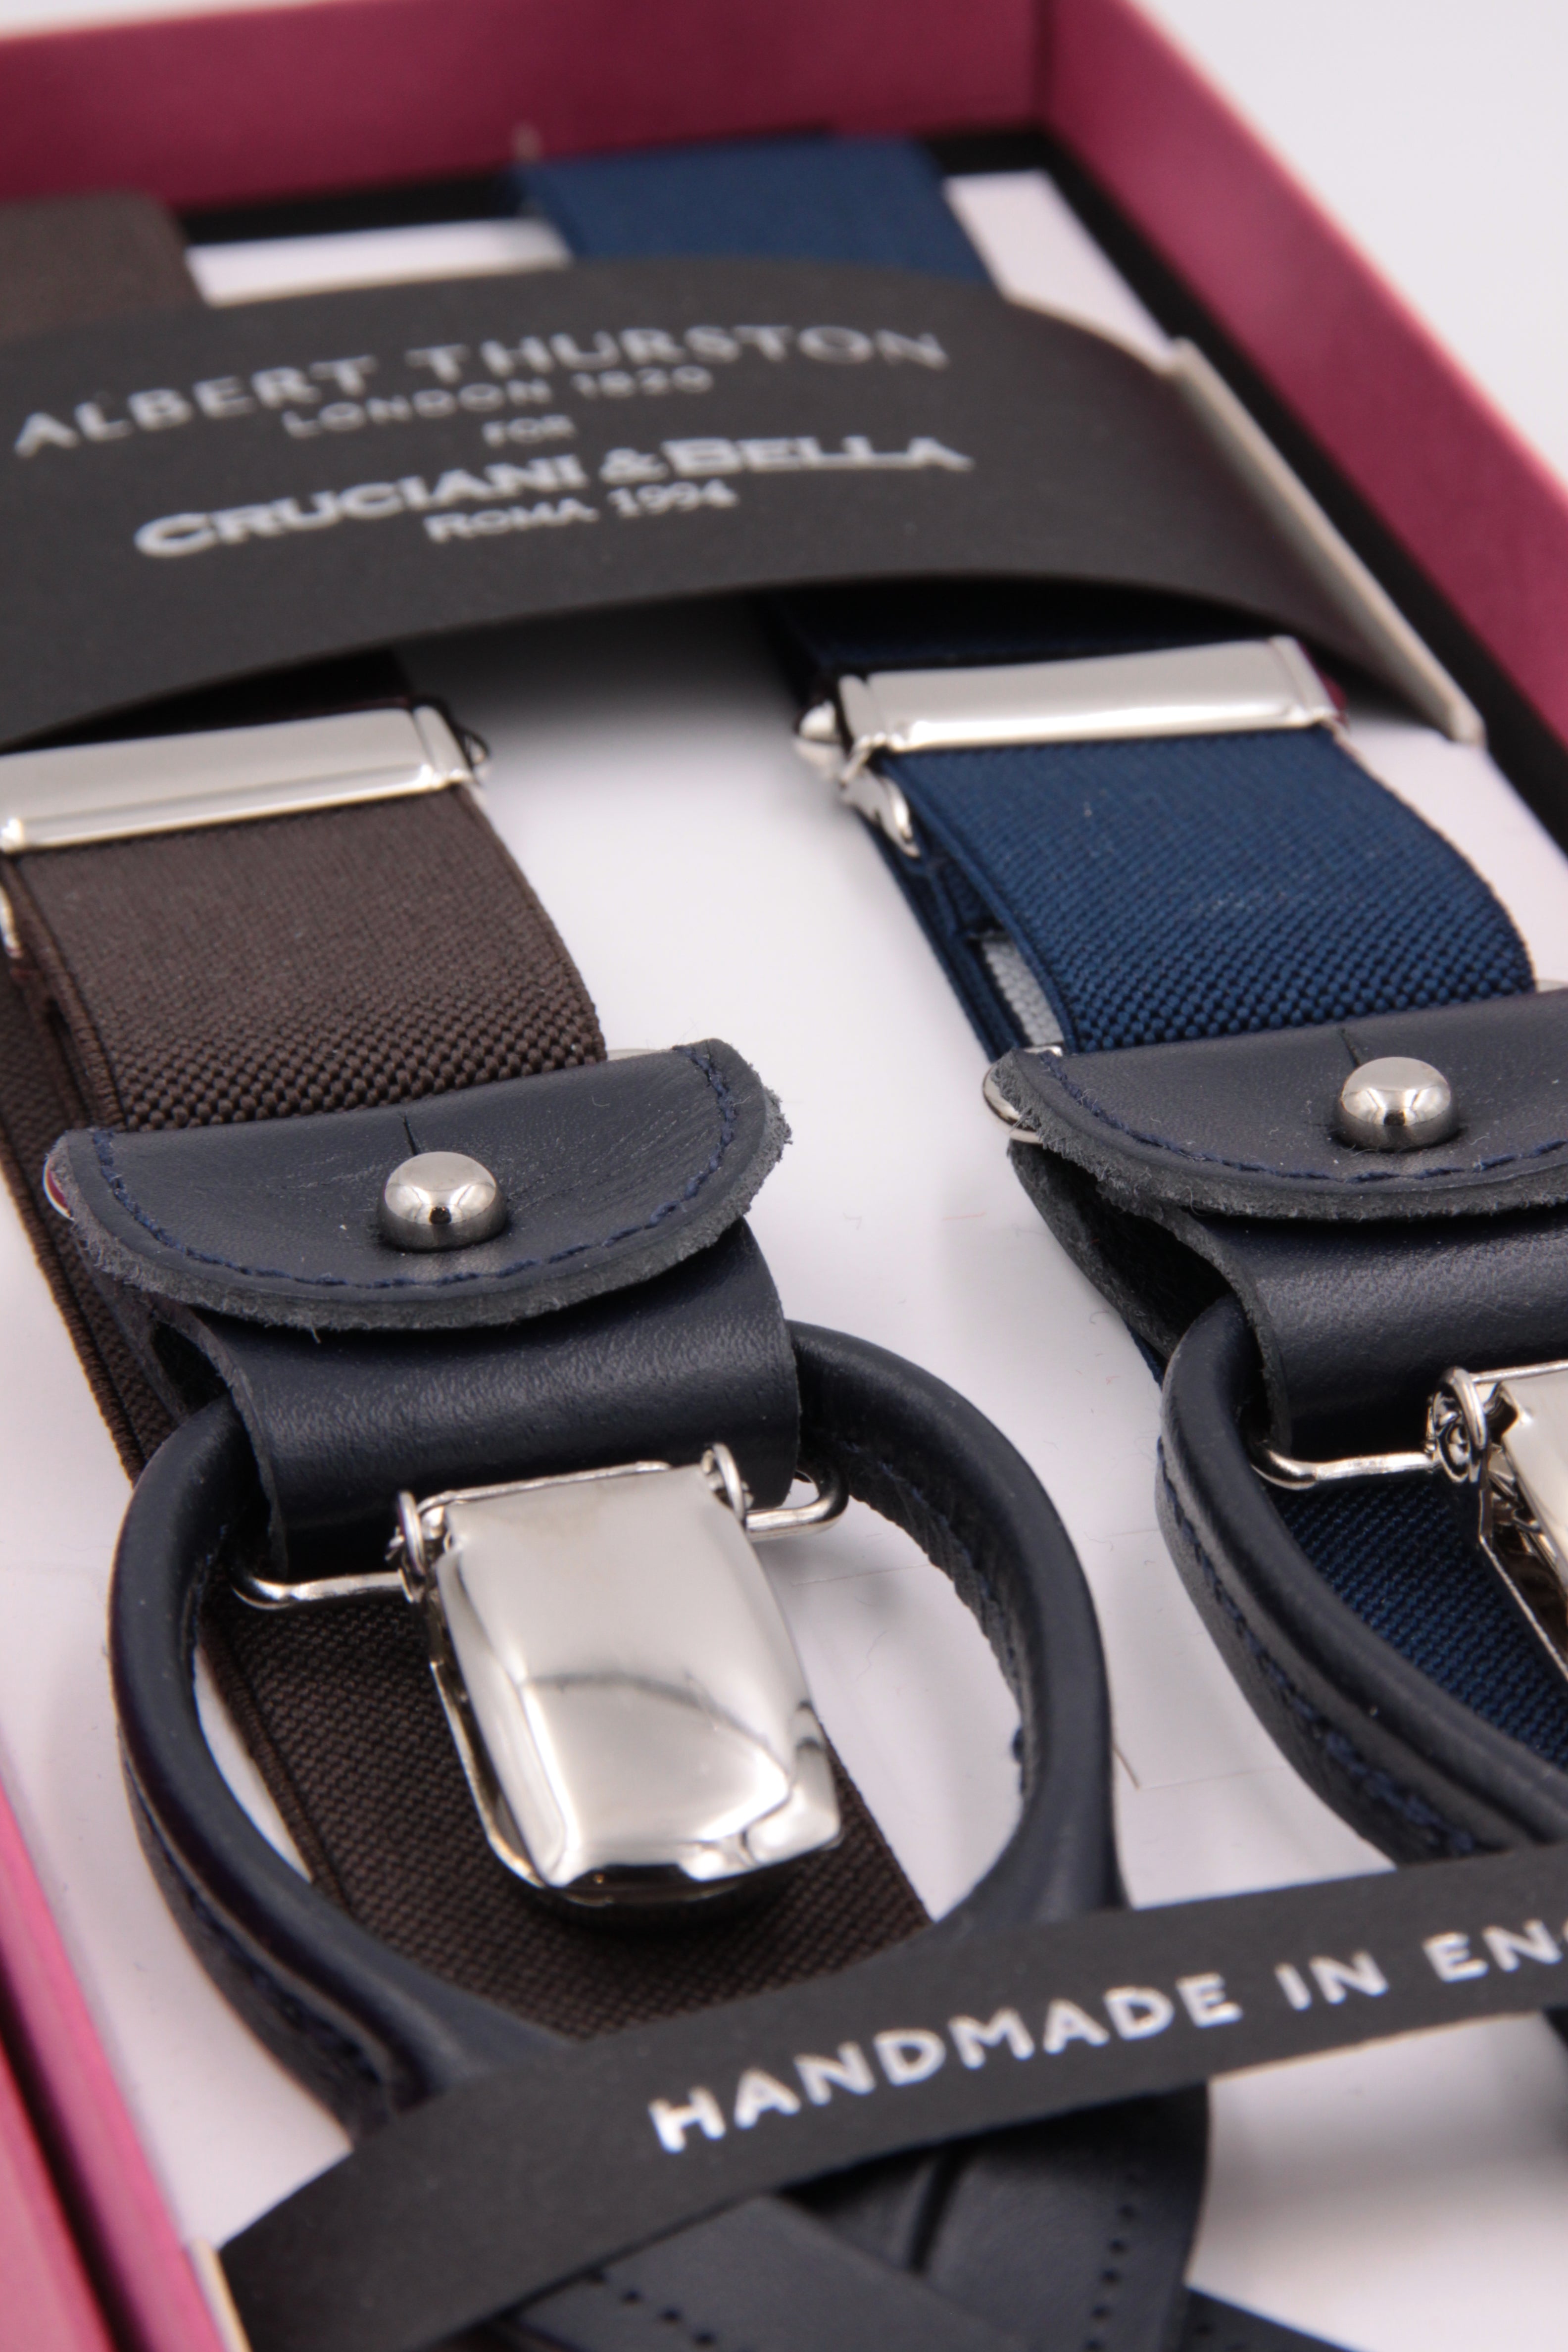 Albert Thurston for Cruciani & Bella Made in England 2 in 1 Adjustable Sizing 25 mm elastic braces Brown and blue navy Leather and clip Y-Shaped Nickel Fittings Size: L